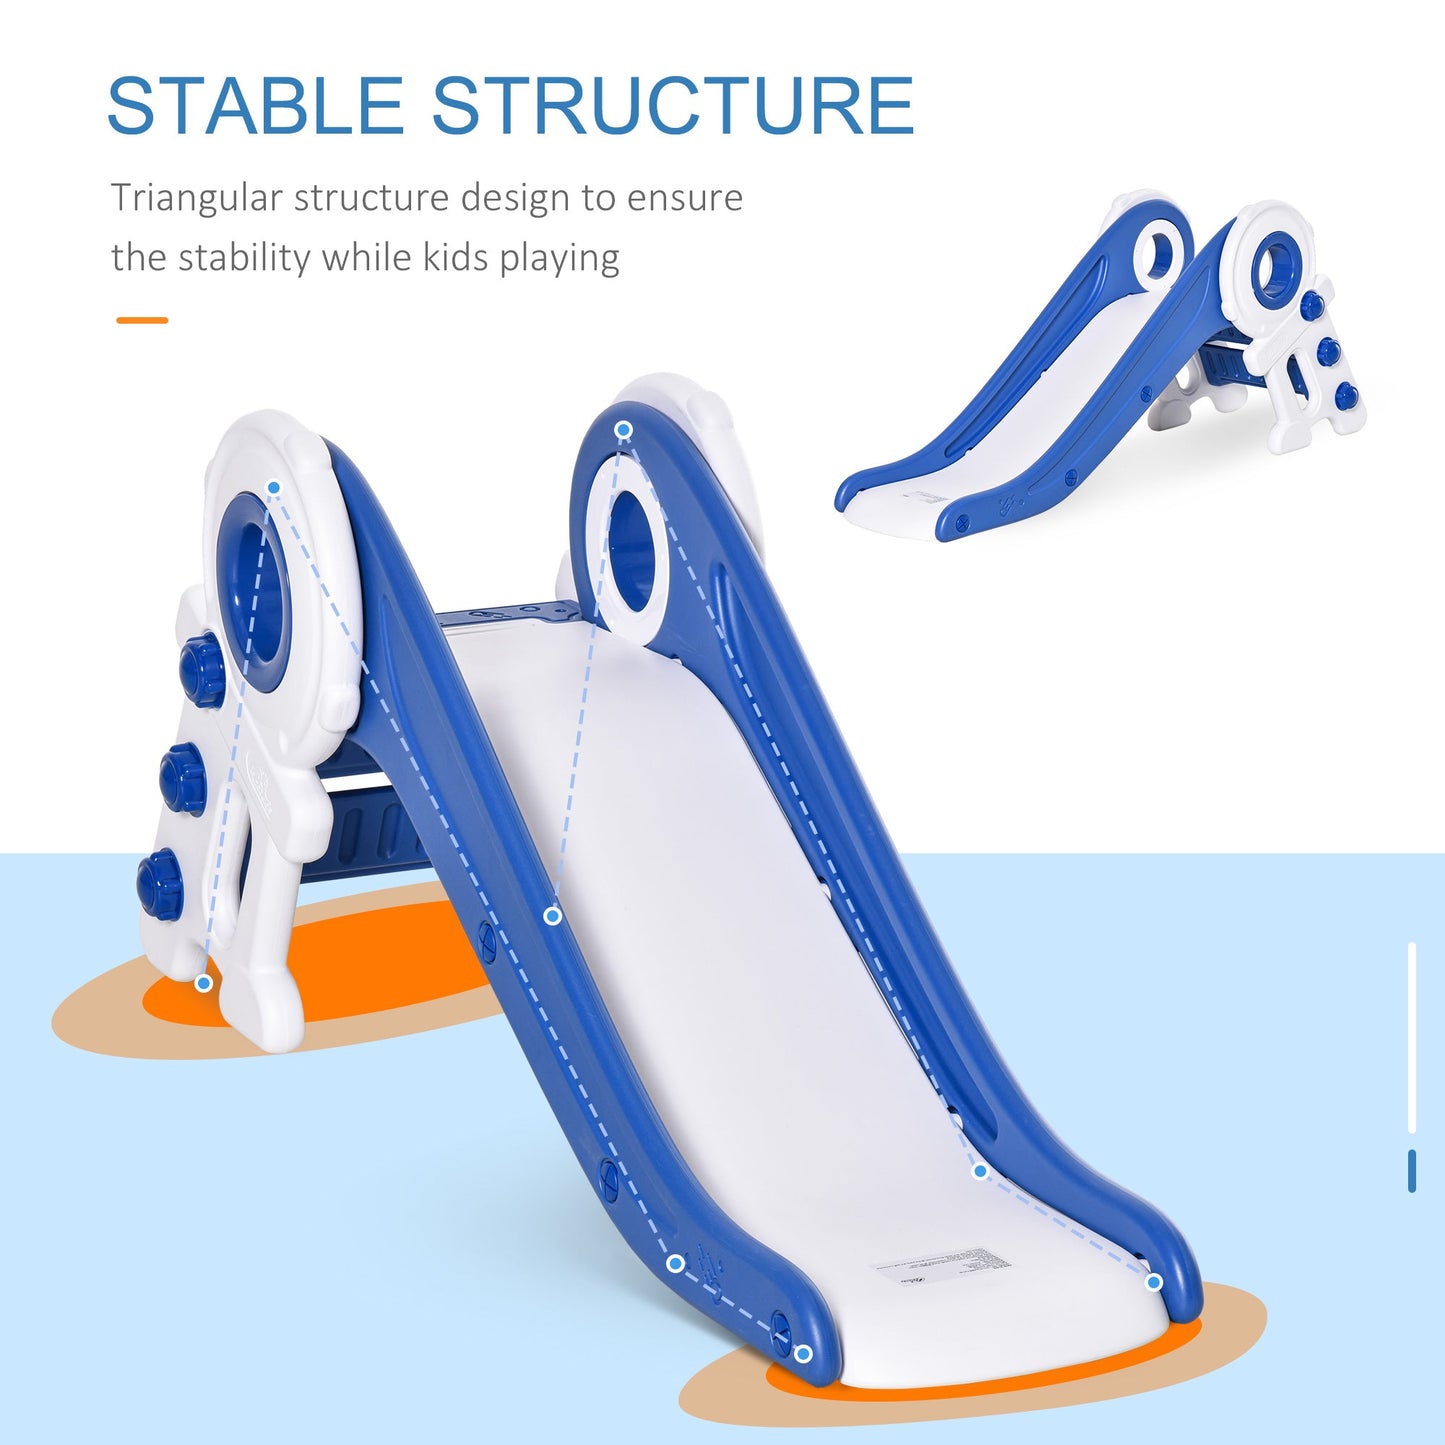 Toys and Games-Folding Kids Slide Freestanding Slider for Toddler Climber Playset Exercise Toy Activity Center for 1-3 Years, Cartoon Astronaut Shaped Blue - Outdoor Style Company